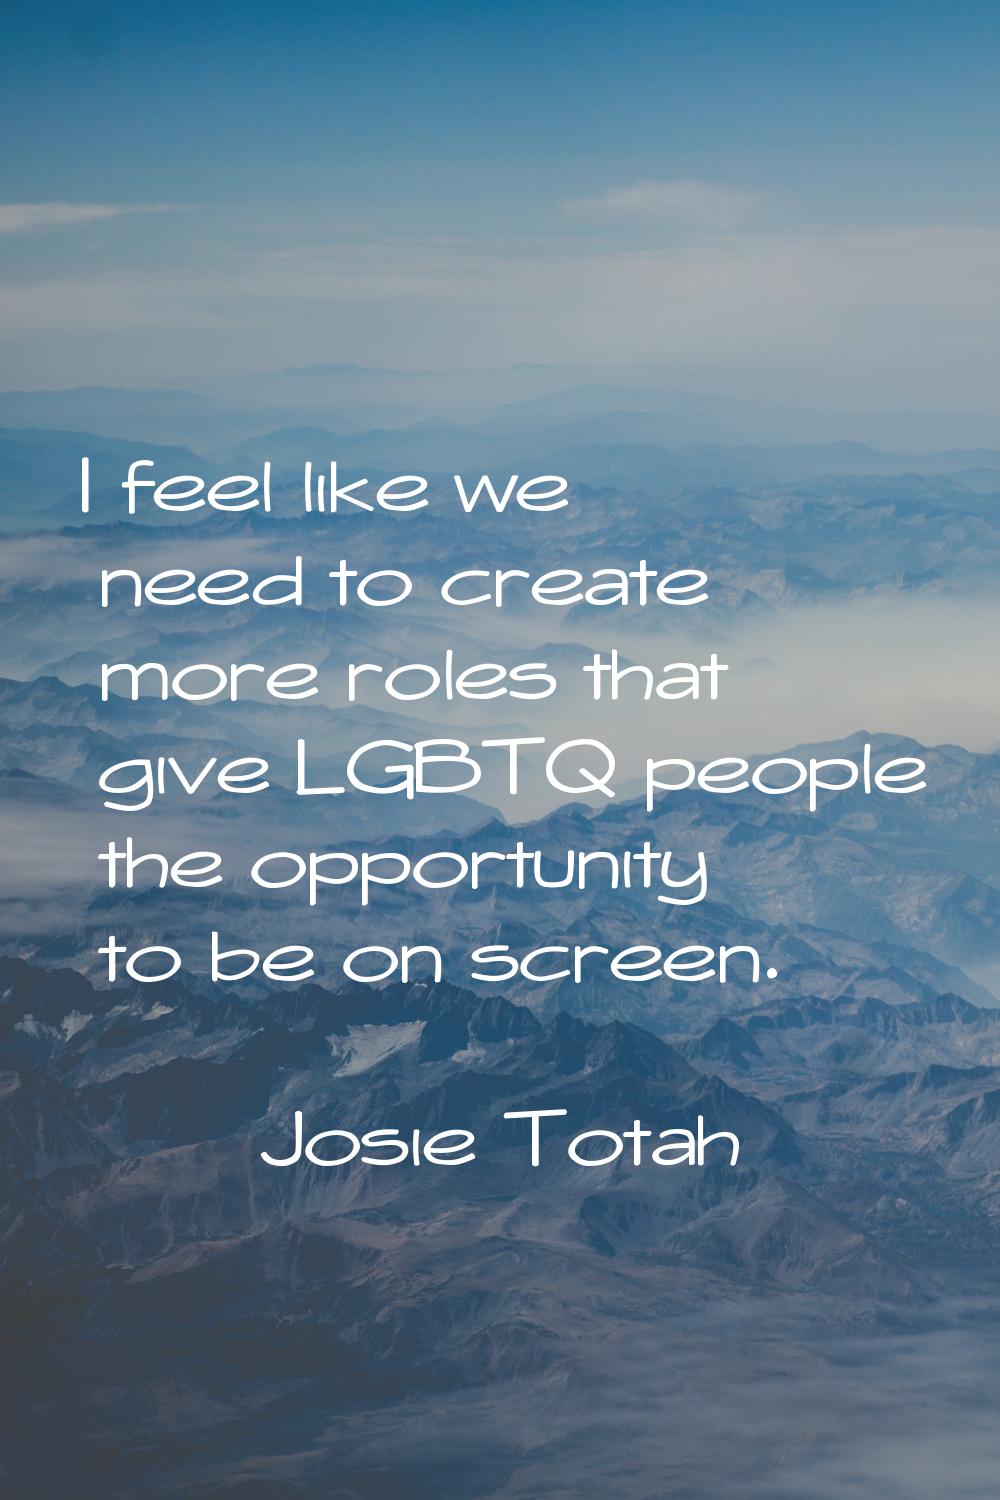 I feel like we need to create more roles that give LGBTQ people the opportunity to be on screen.